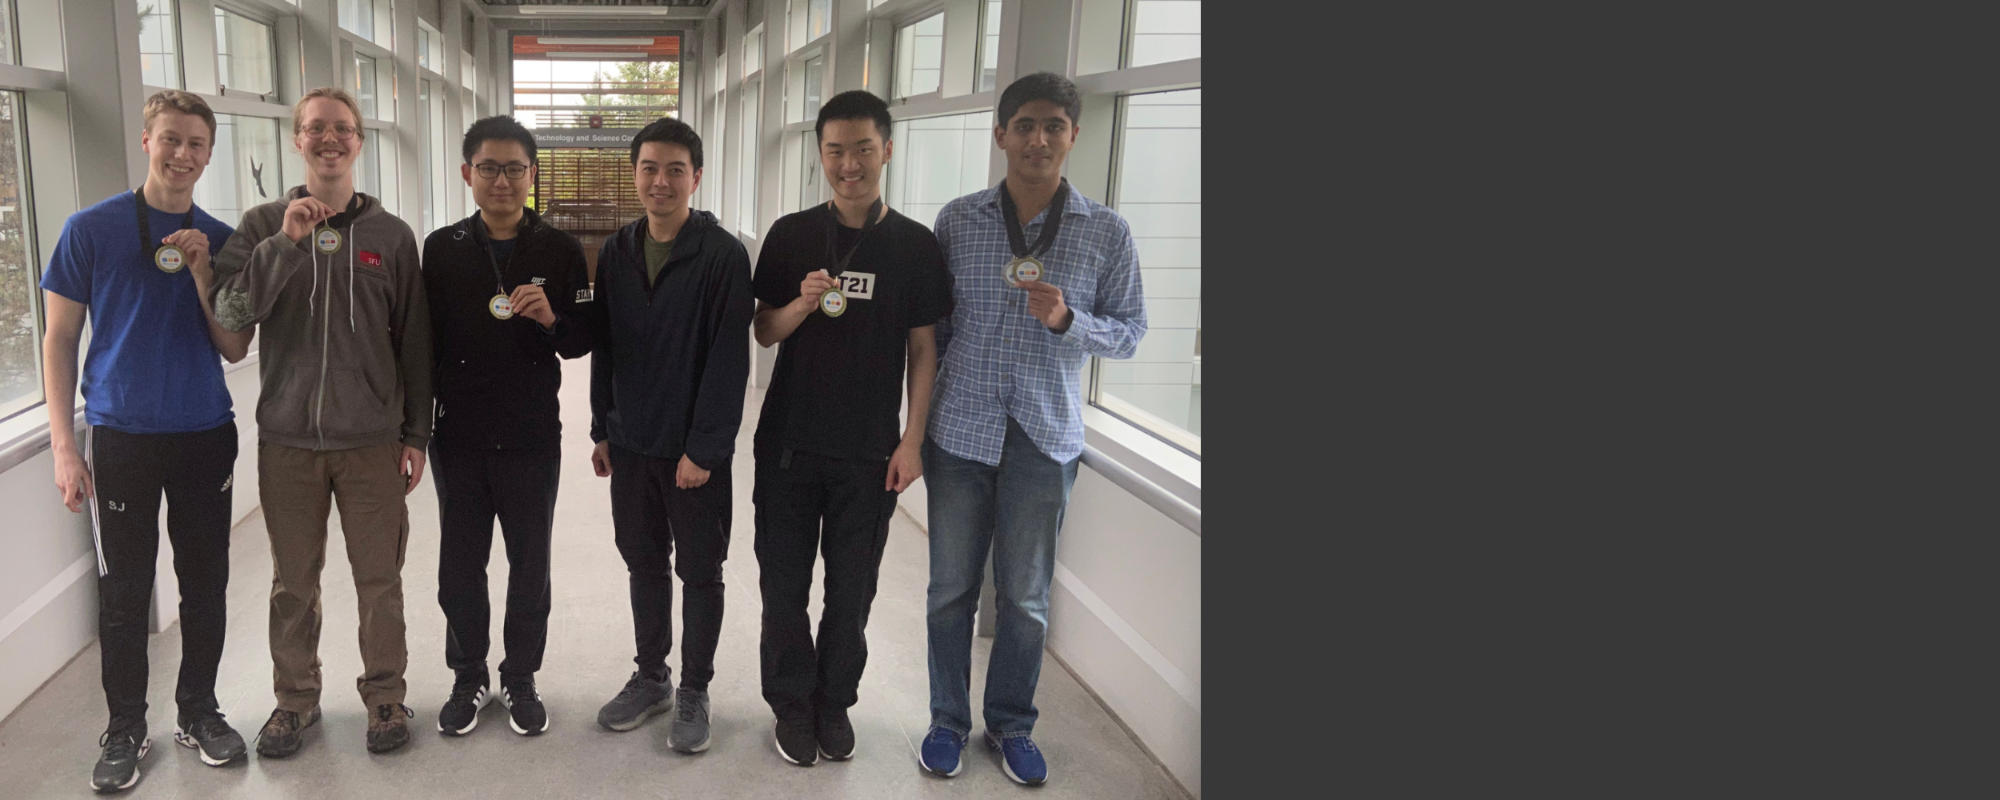 SFU Computing Science Students win multiple awards at 2021 IPC Pacific Northwest Regional Contest